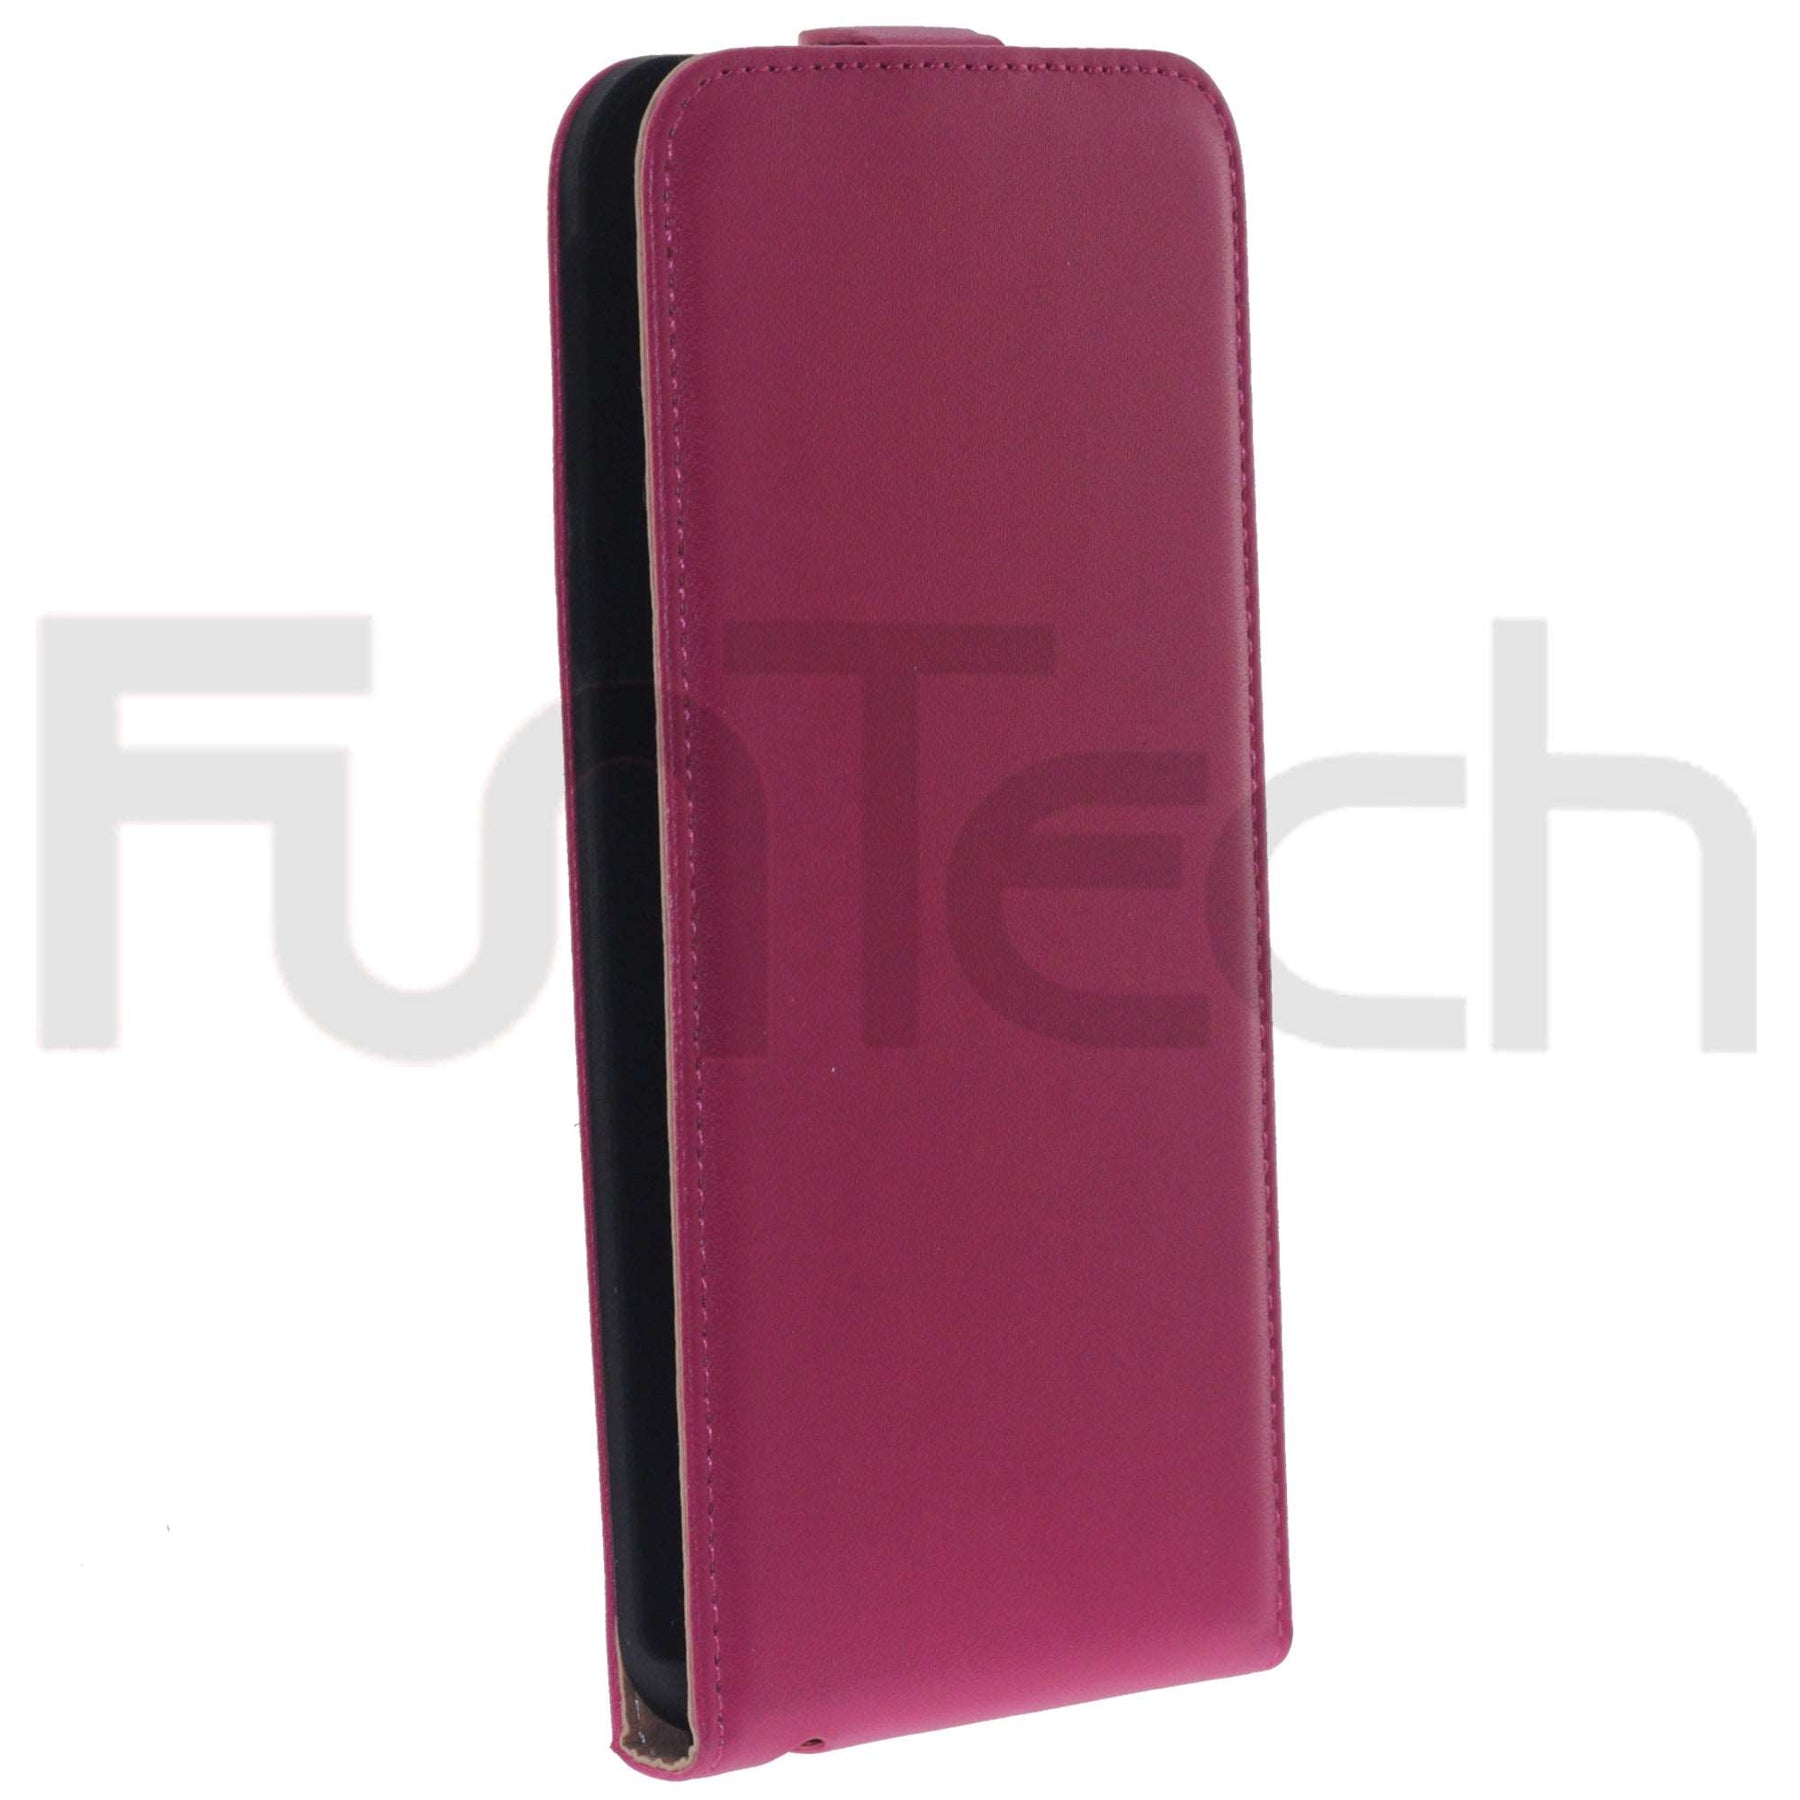 Apple, iPhone 6 Case, Color Pink.